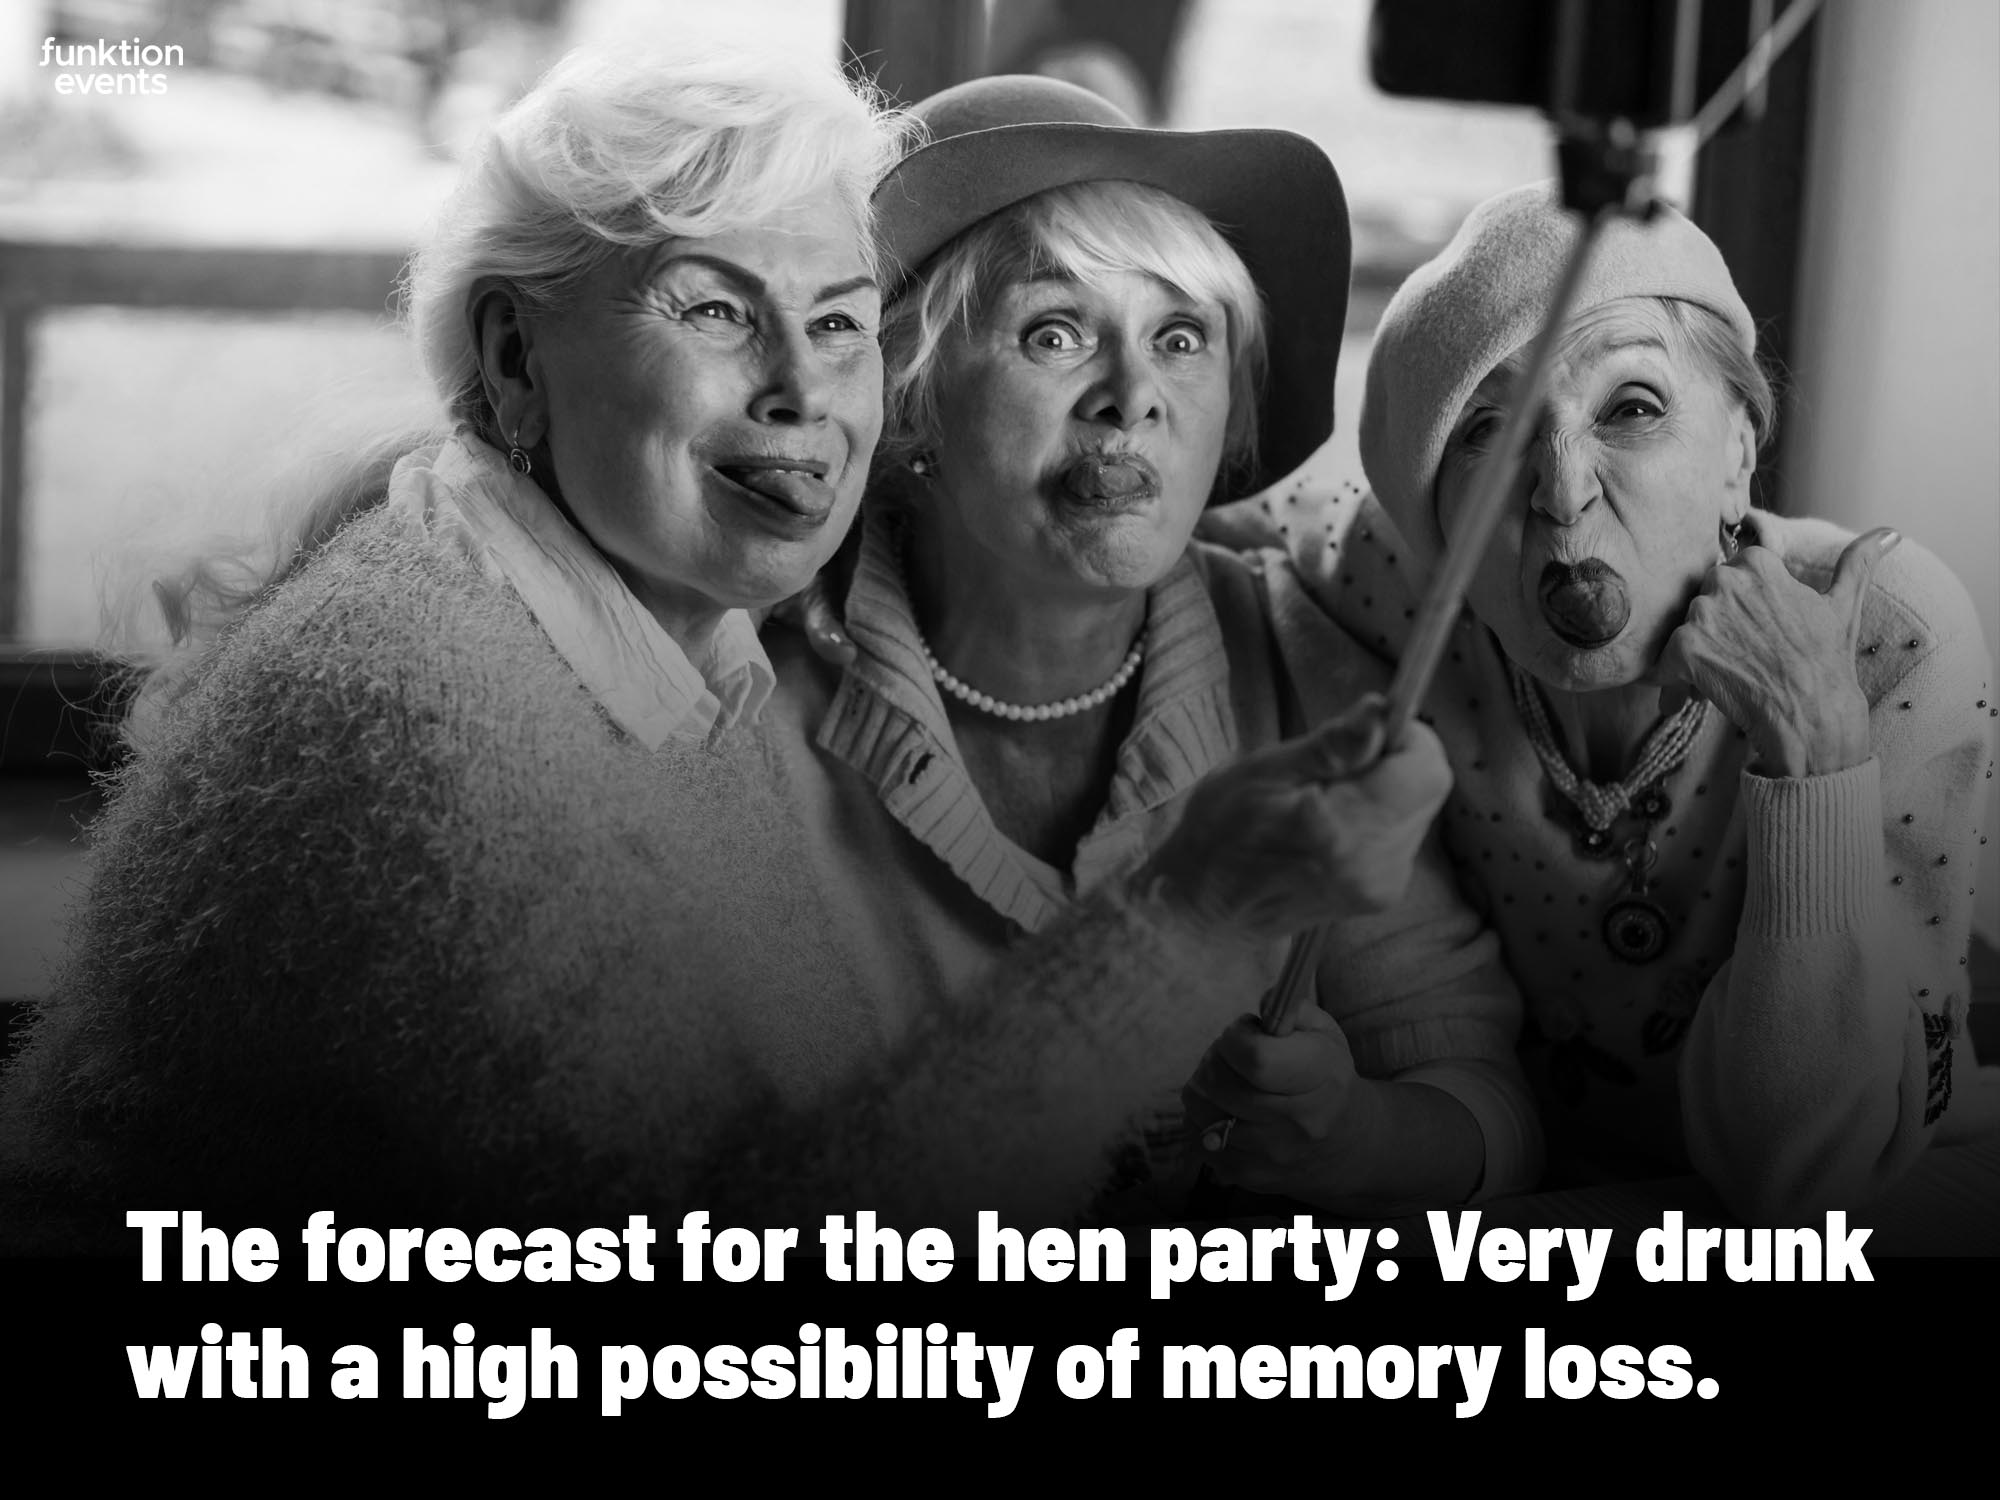 The forecast for the hen party: Very drunk with a high possibility of memory loss - Meme 16